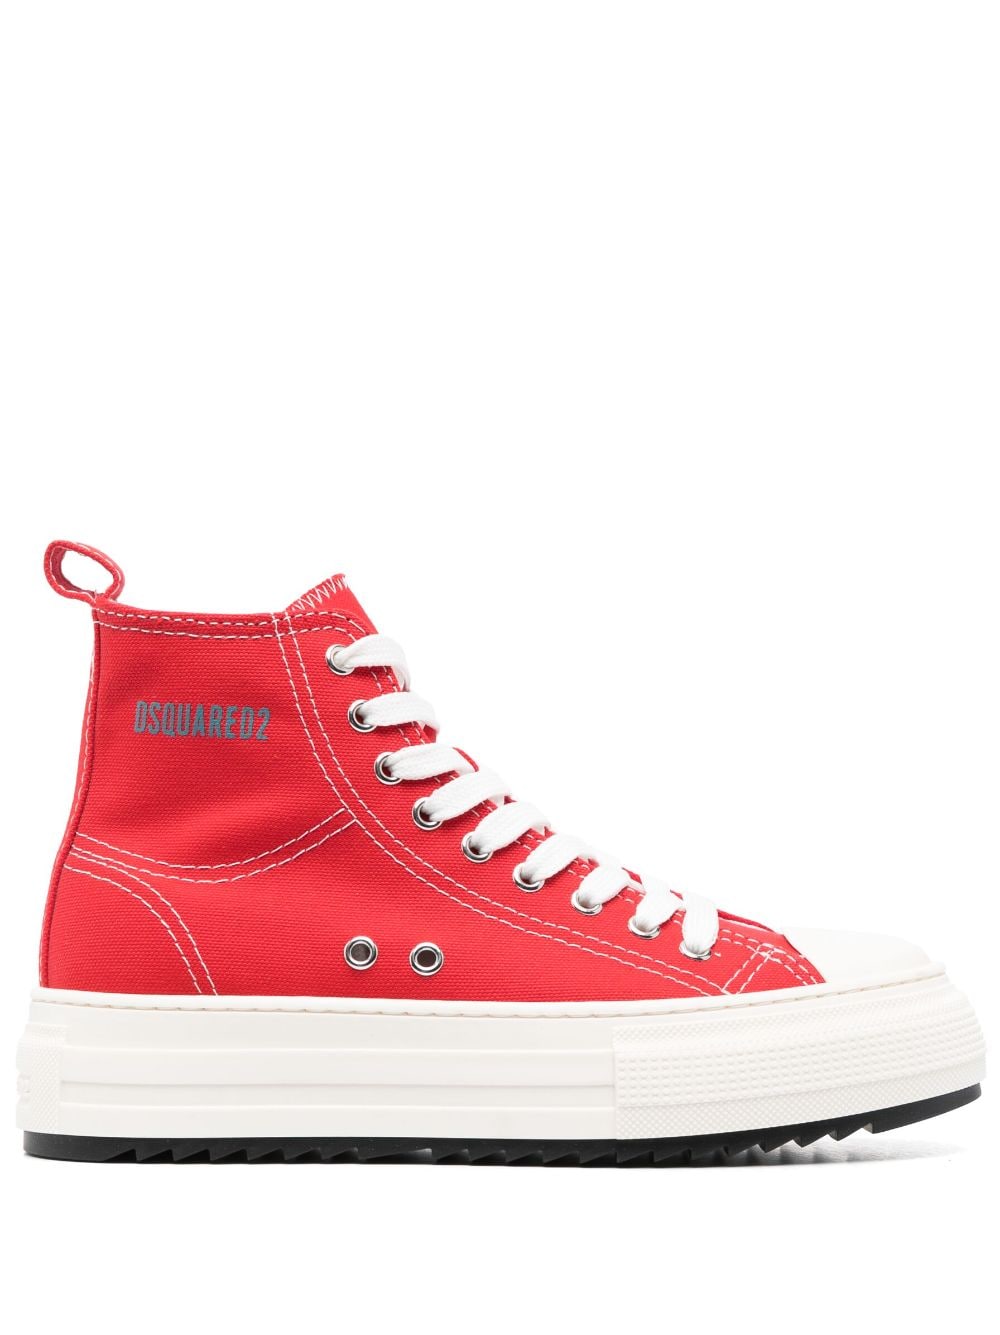 Dsquared2 High-Top-Sneakers mit Plateau - Rot von Dsquared2